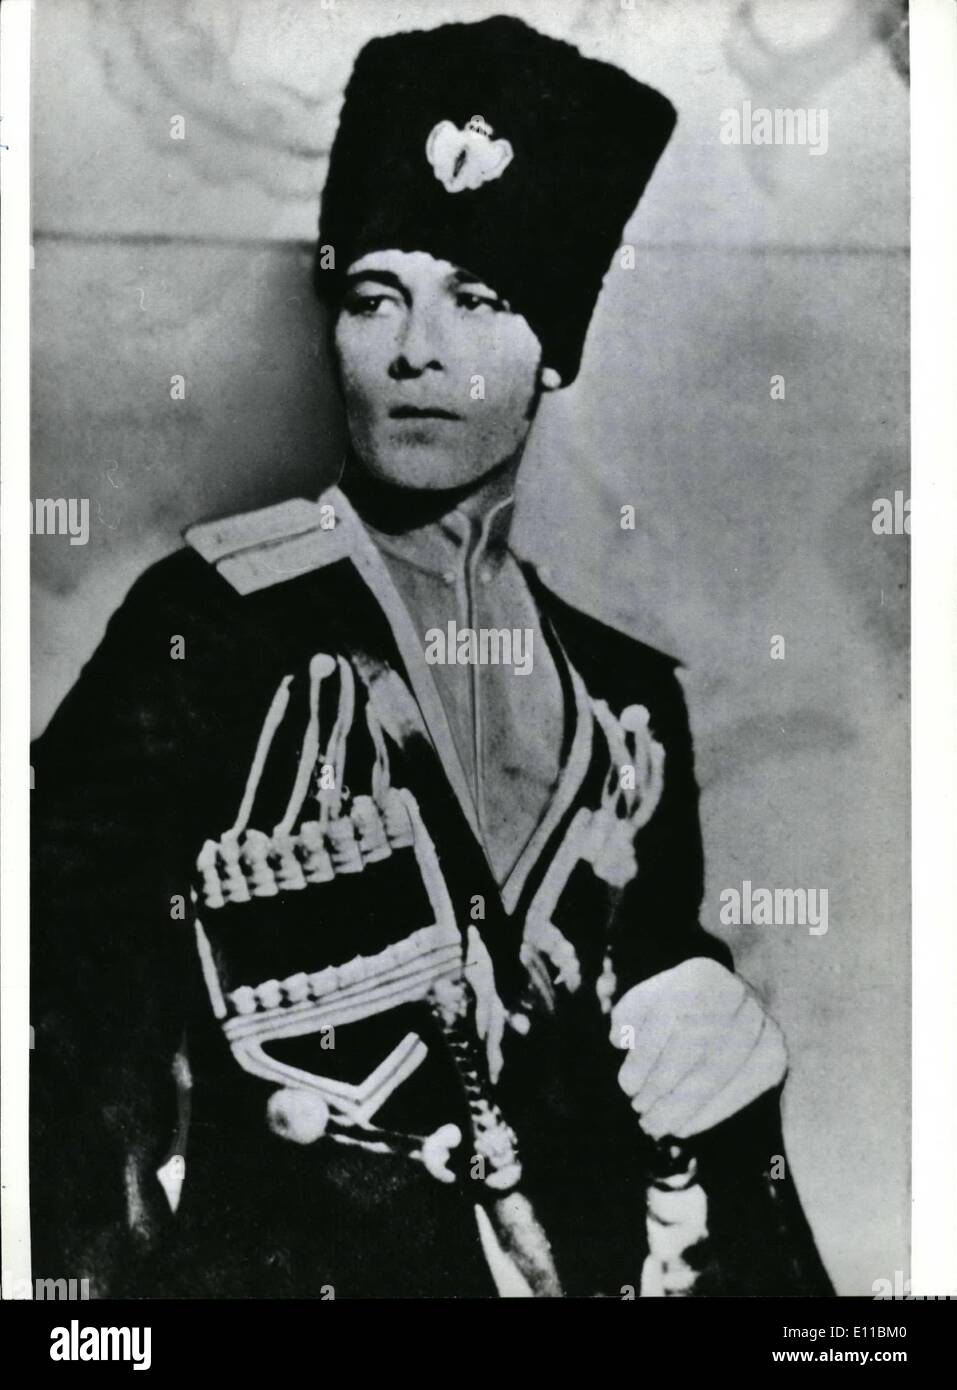 Aug. 08, 1976 - Rudolph Valentino died 50 years ago: 50 years ago, on August 23rd 1926, silent movies star Rudolph Valentino (picture in ''The Eagles'') died on the age 31 in New York. Although it is half a century ago now that the screen star died, his name has by no means forgotten. Presently two films about his life are being made, one in the United States (with Russian dancer Rudolf Nurekew) and one in Italy (with Helmut Berger). Valentino, born as Rodolfo Guglielmi di Valentino d'Antonquella on May 6th 1895 in Castellaneta/Italy, had emigrated to American in 1913 Stock Photo